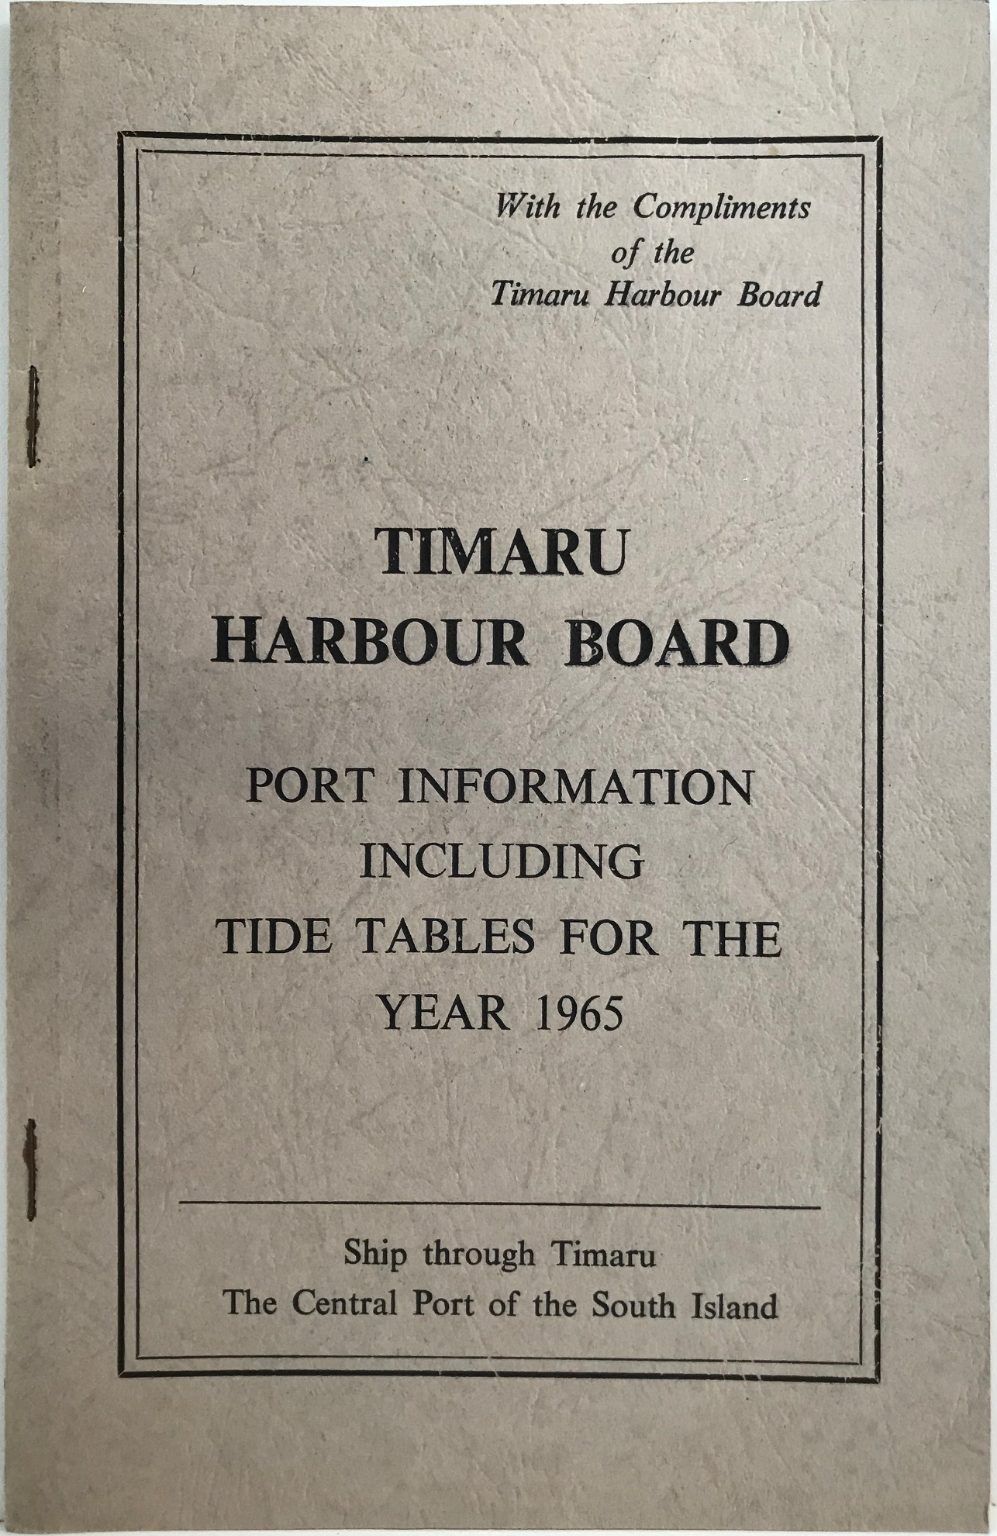 TIMARU HARBOUR BOARD: Port Information and Tide Tables for the Year 1965